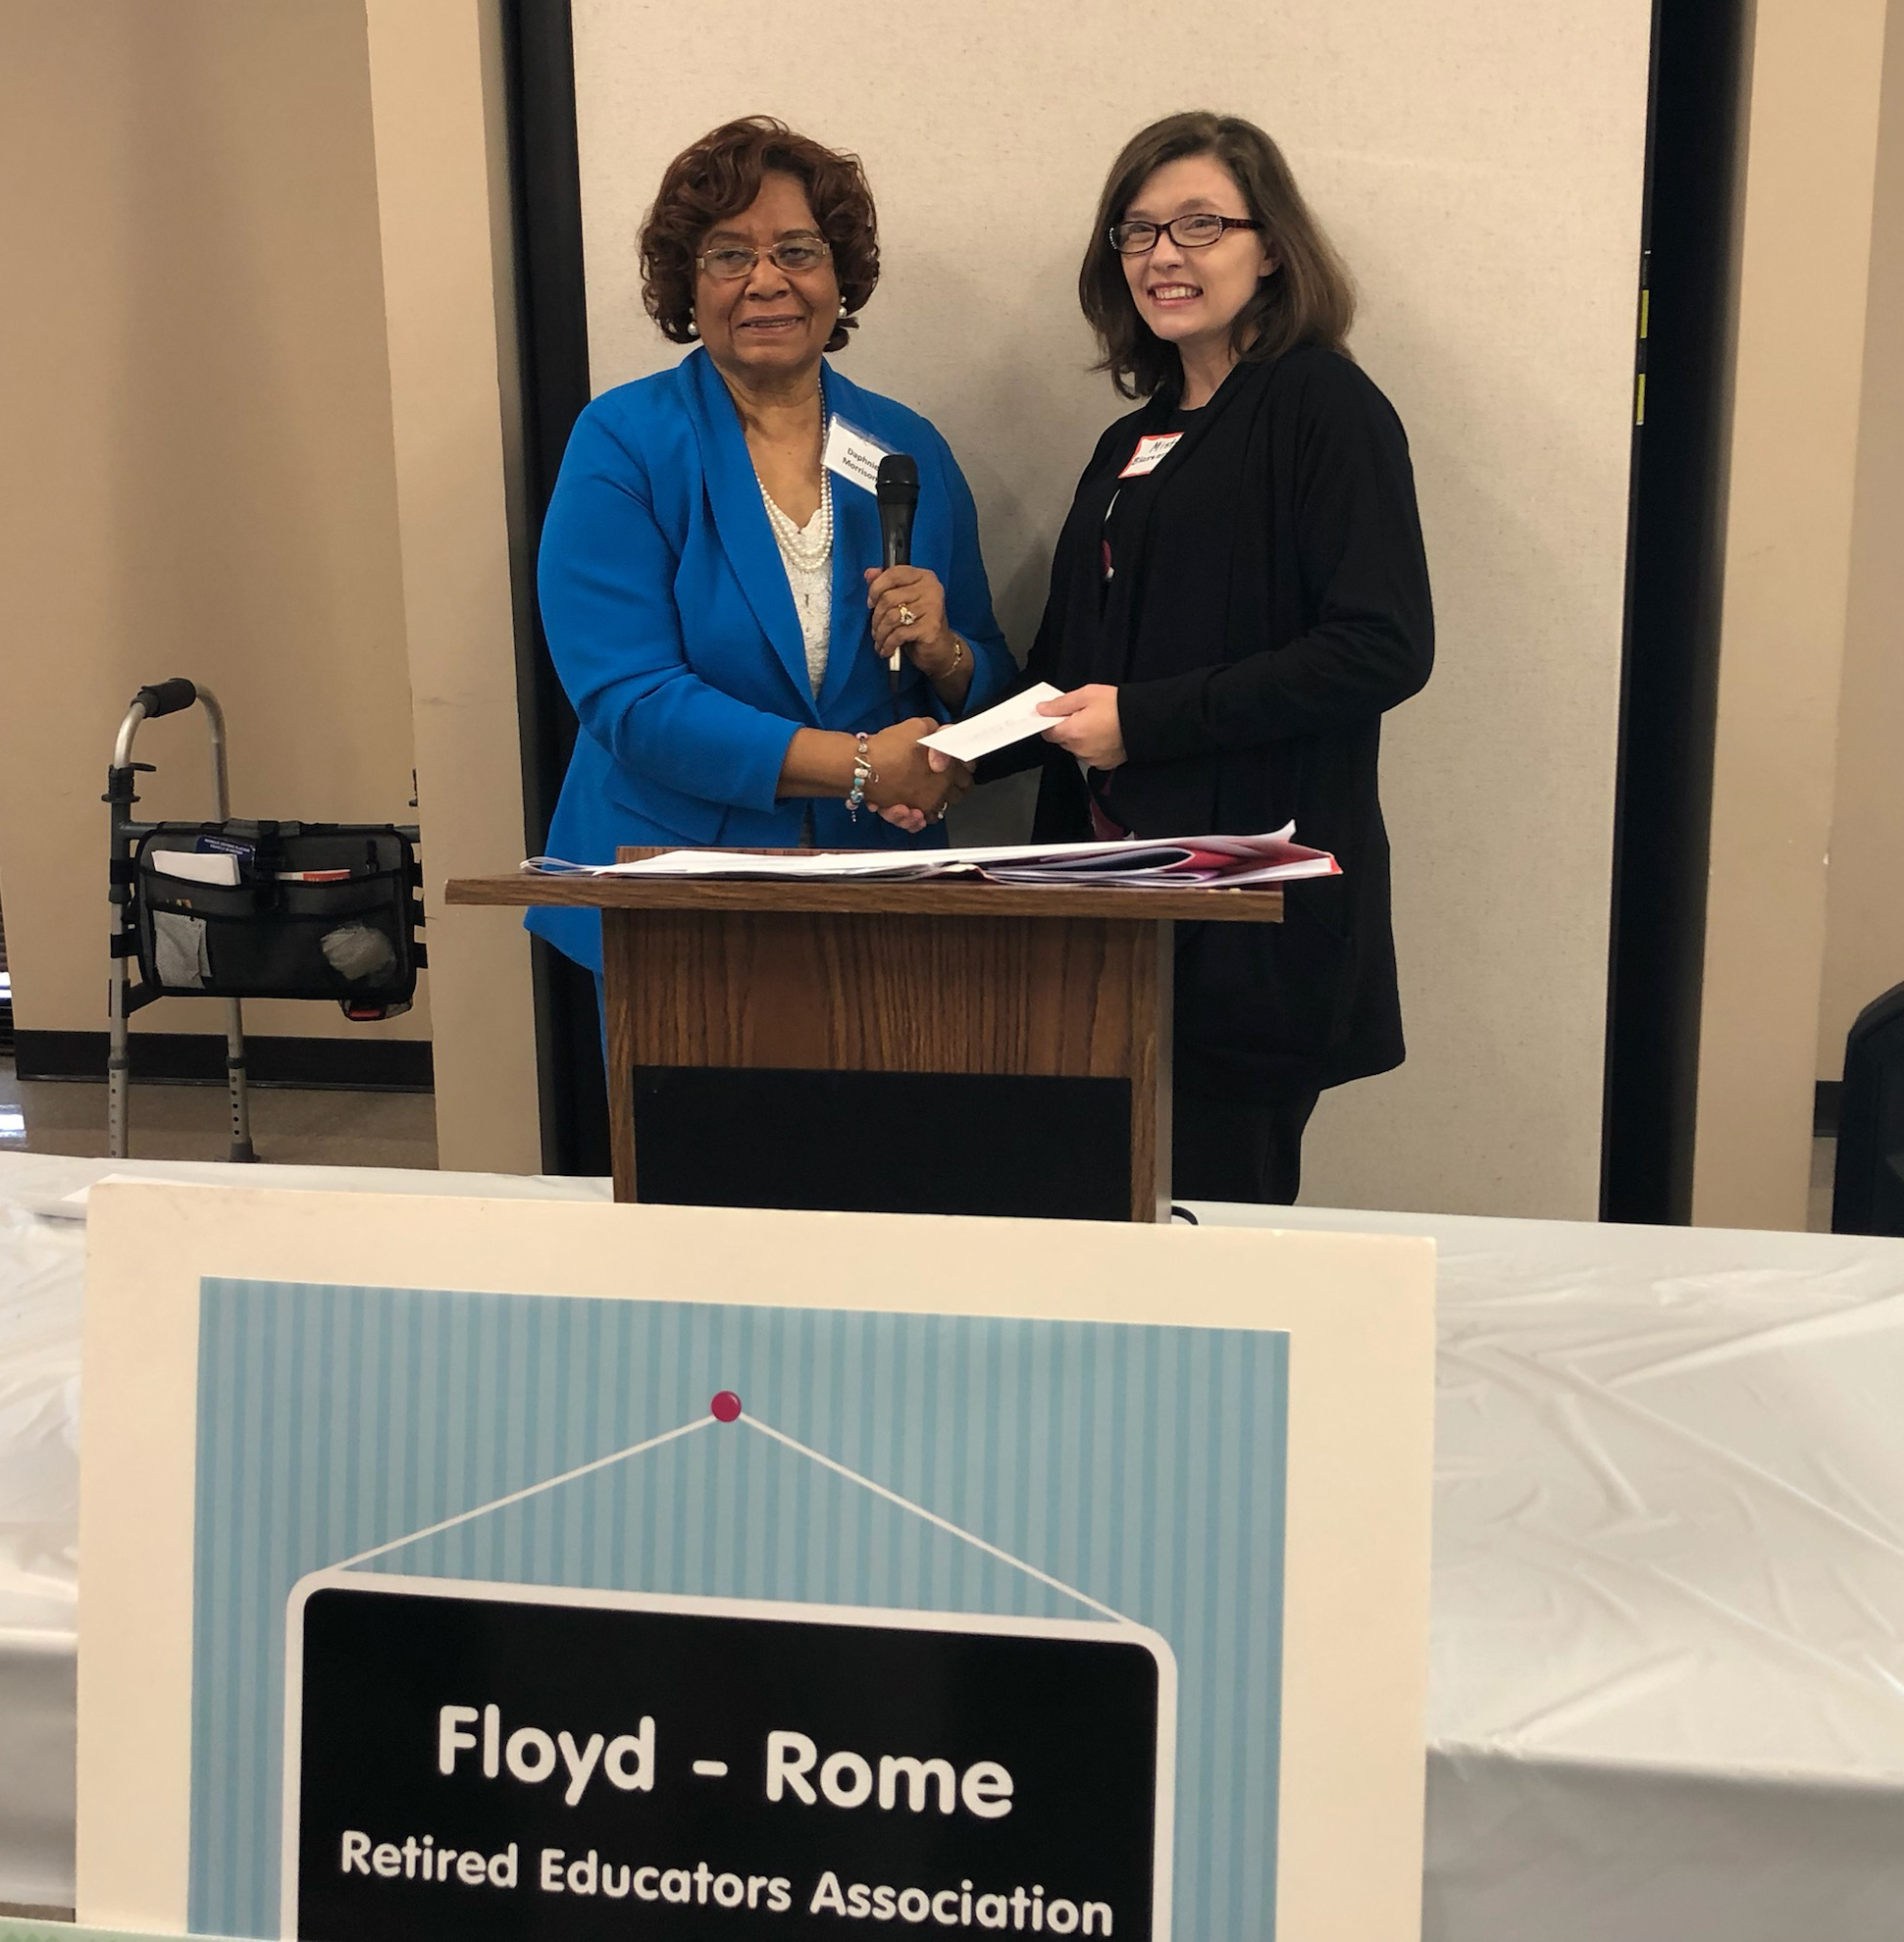 GNTC Early Childhood Care and Education student Misty Blasengame (right) receives a $1,000 scholarship from Daphnie Morrison (left) during a luncheon for the Floyd-Rome Retired Educators Association.